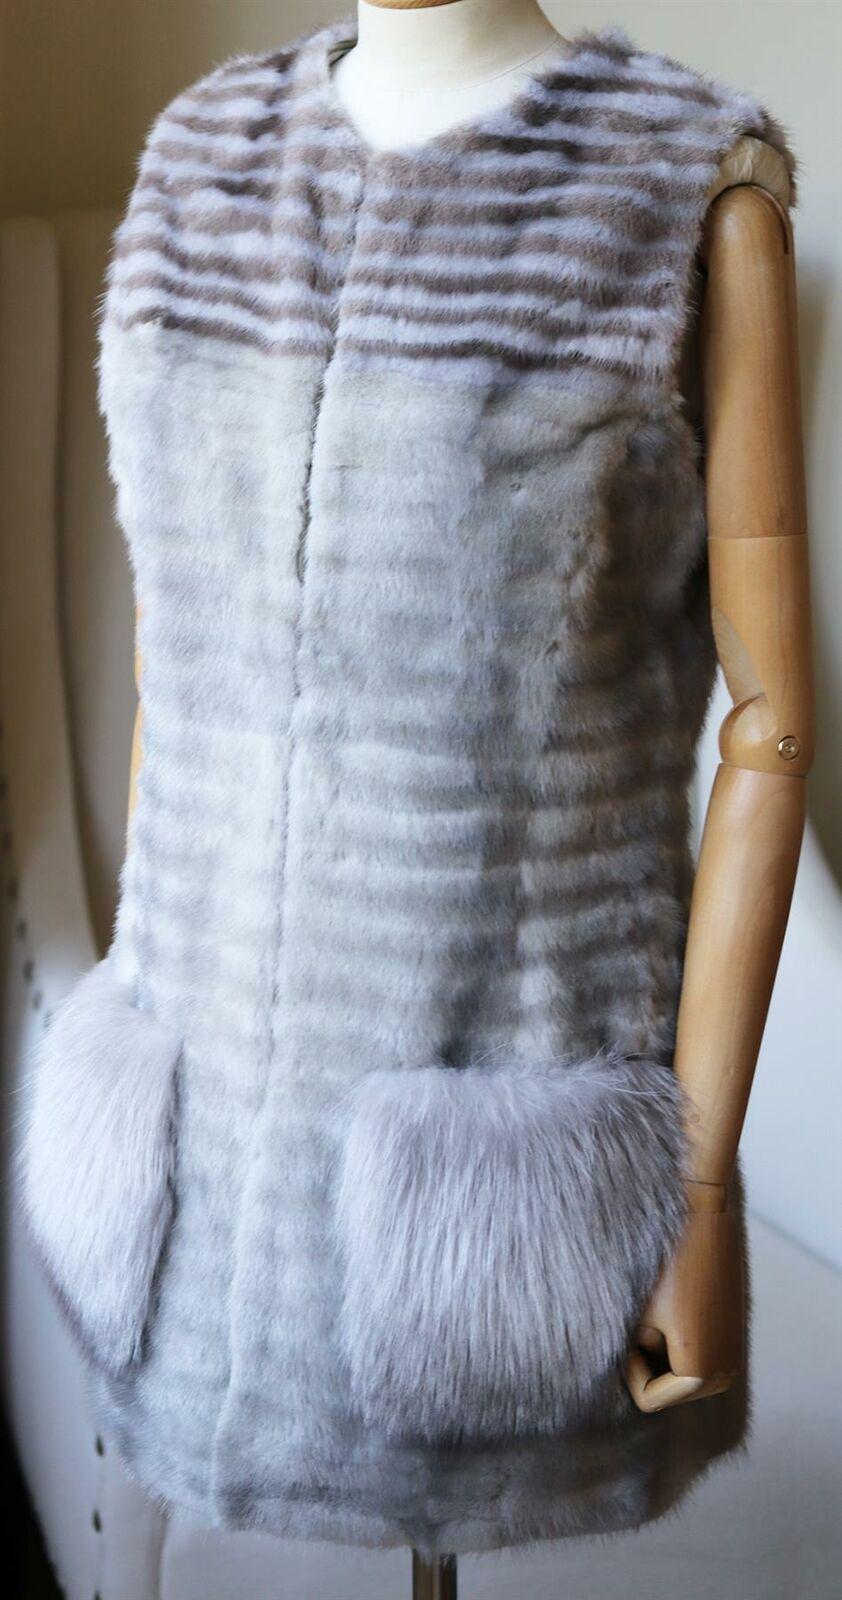 This gilet by Harrods adds elegance to any outfit with the variation of textures, panels and colours.
Grey and taupe mink, grey fox.
Hook and eye fastening through front.
100% Mink; fabric2: 100% platnium fox fur; lining: 100% silk.
Size: Small (UK